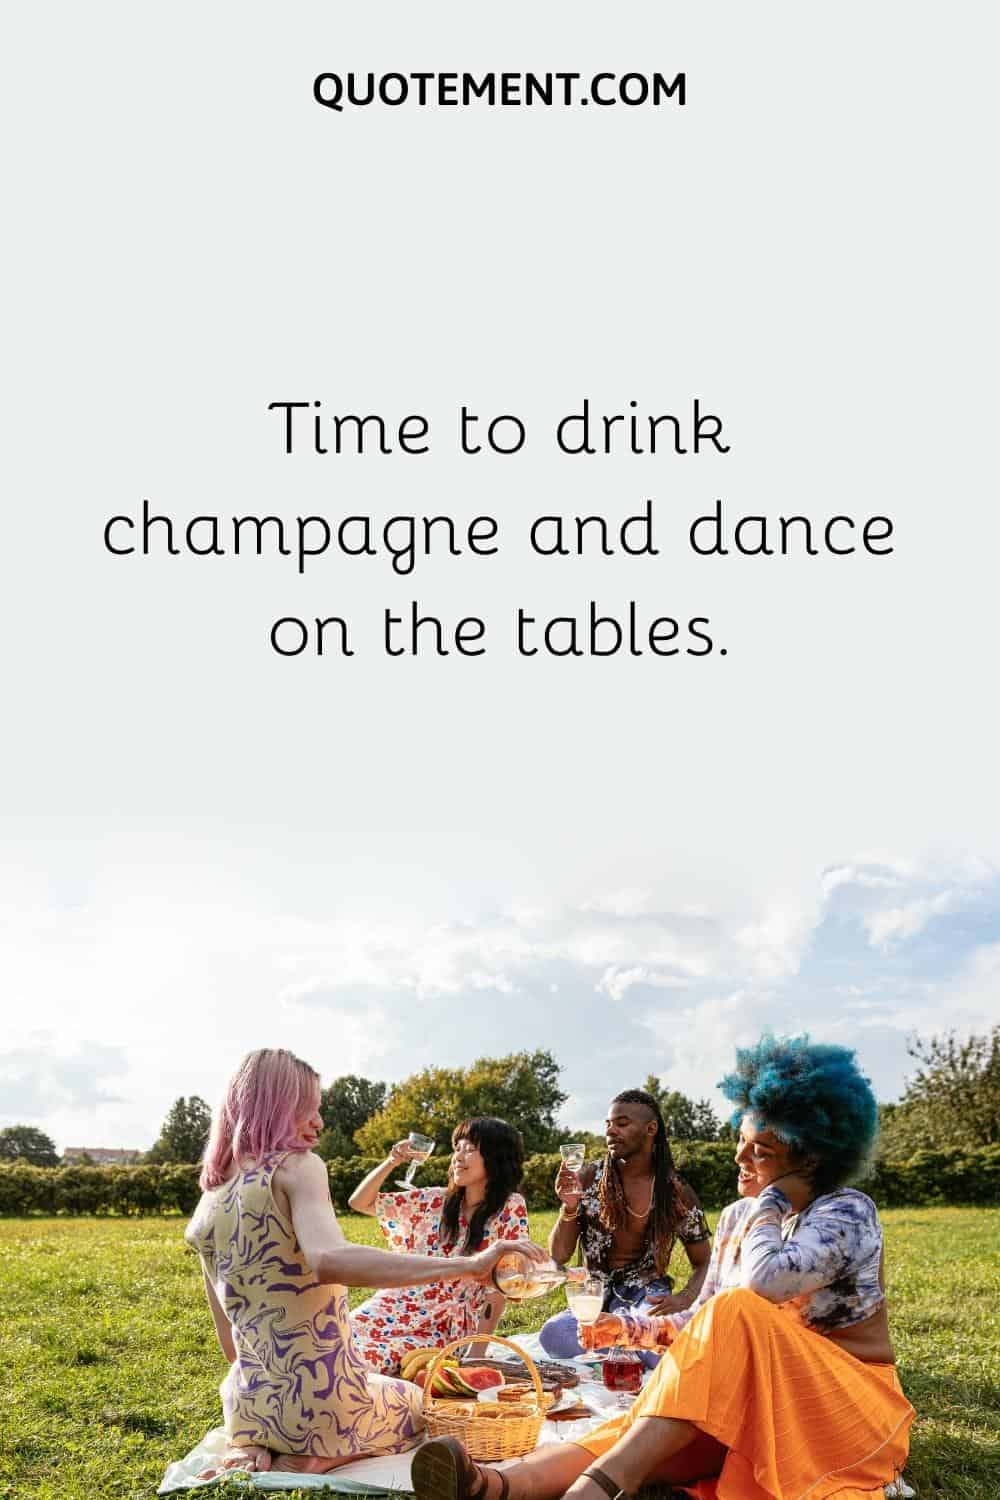 Time to drink champagne and dance on the tables.